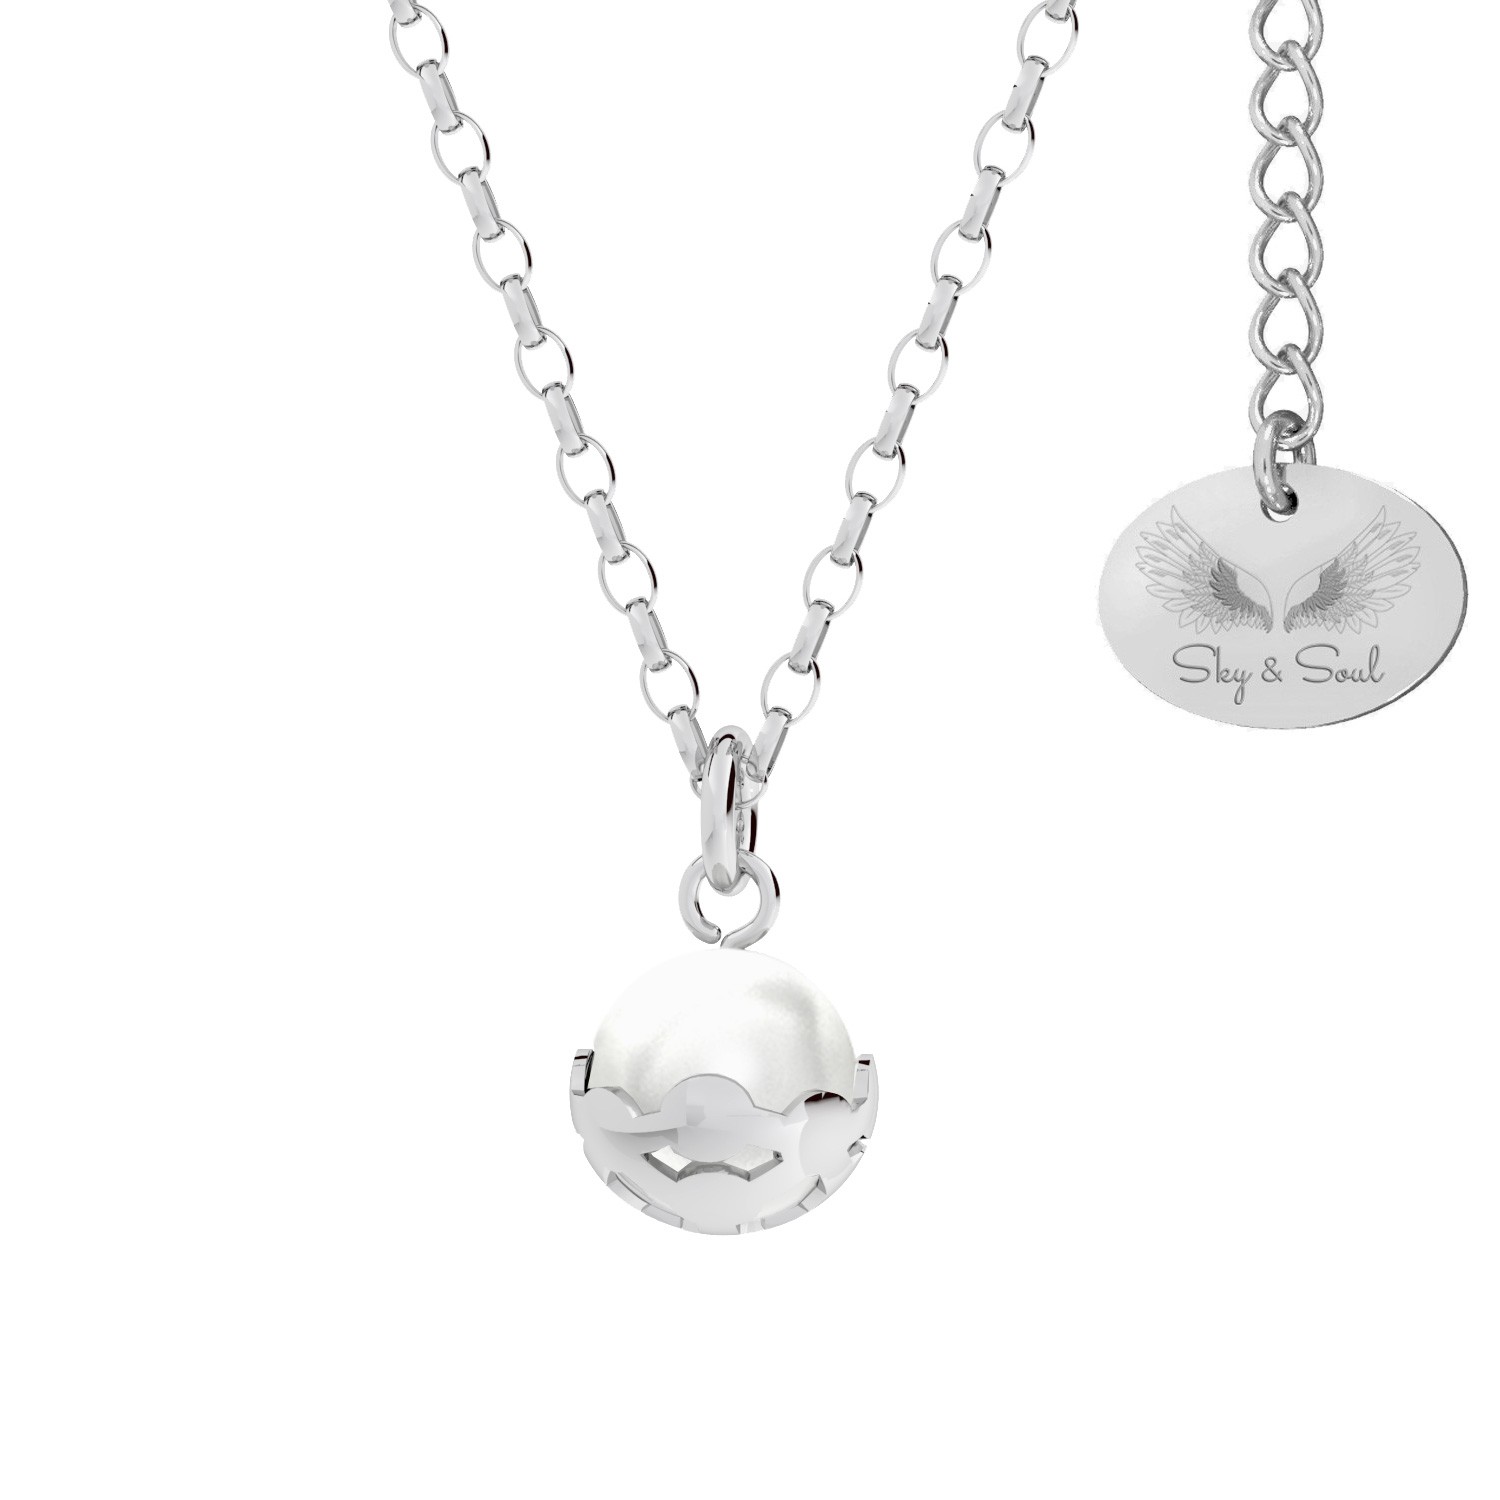 Necklace with pearl, Sky&Soul, sterling silver 925